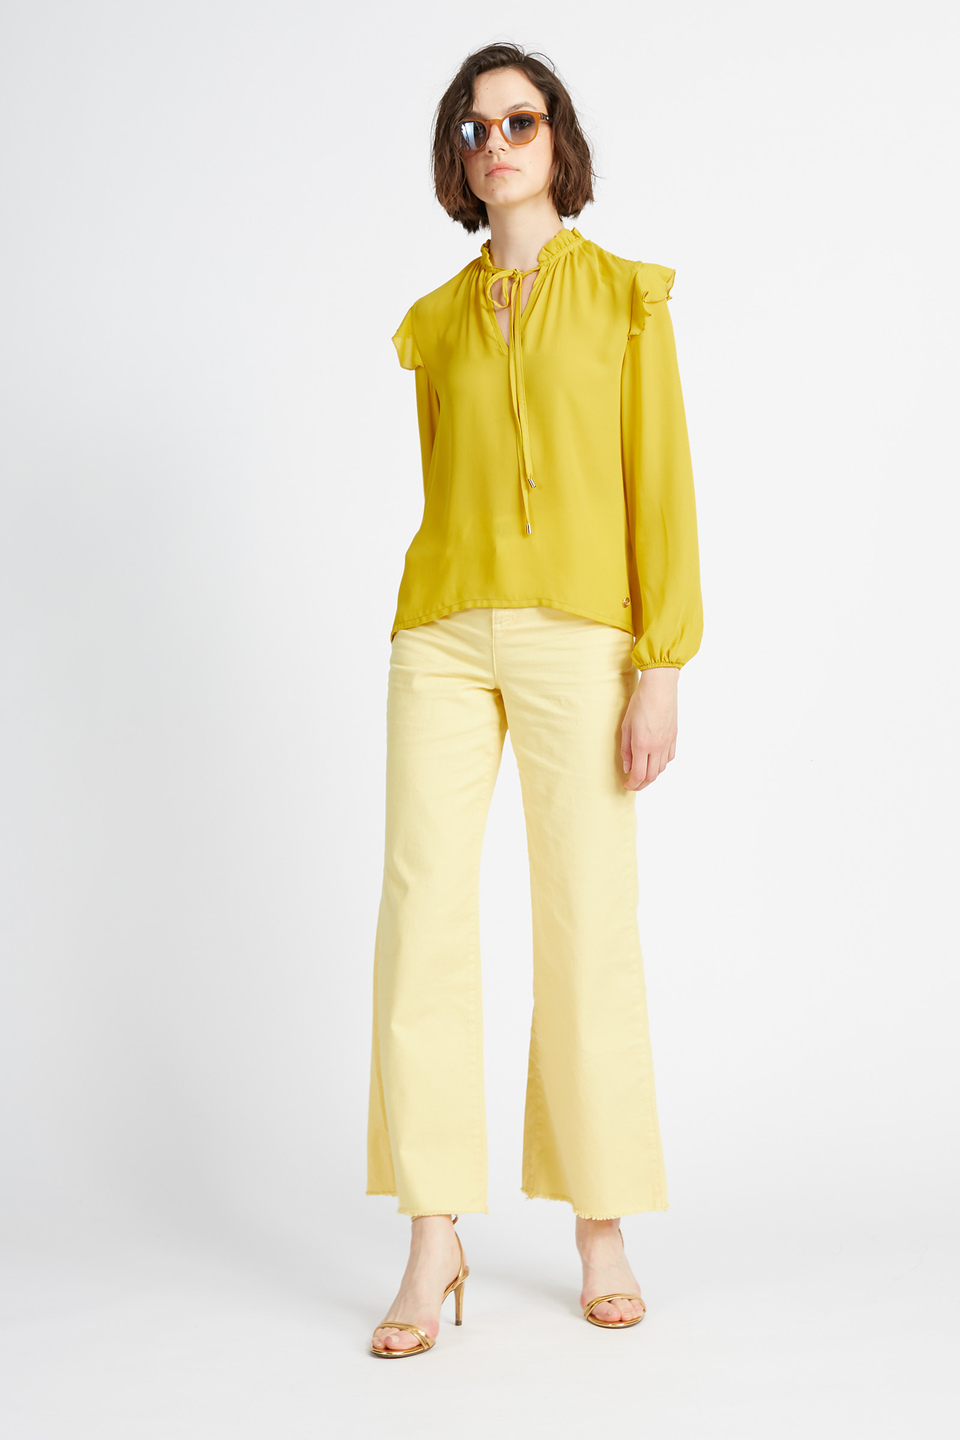 Women's long-sleeved shirt in solid color and georgette fabric Spring Weekend - Ville | La Martina - Official Online Shop